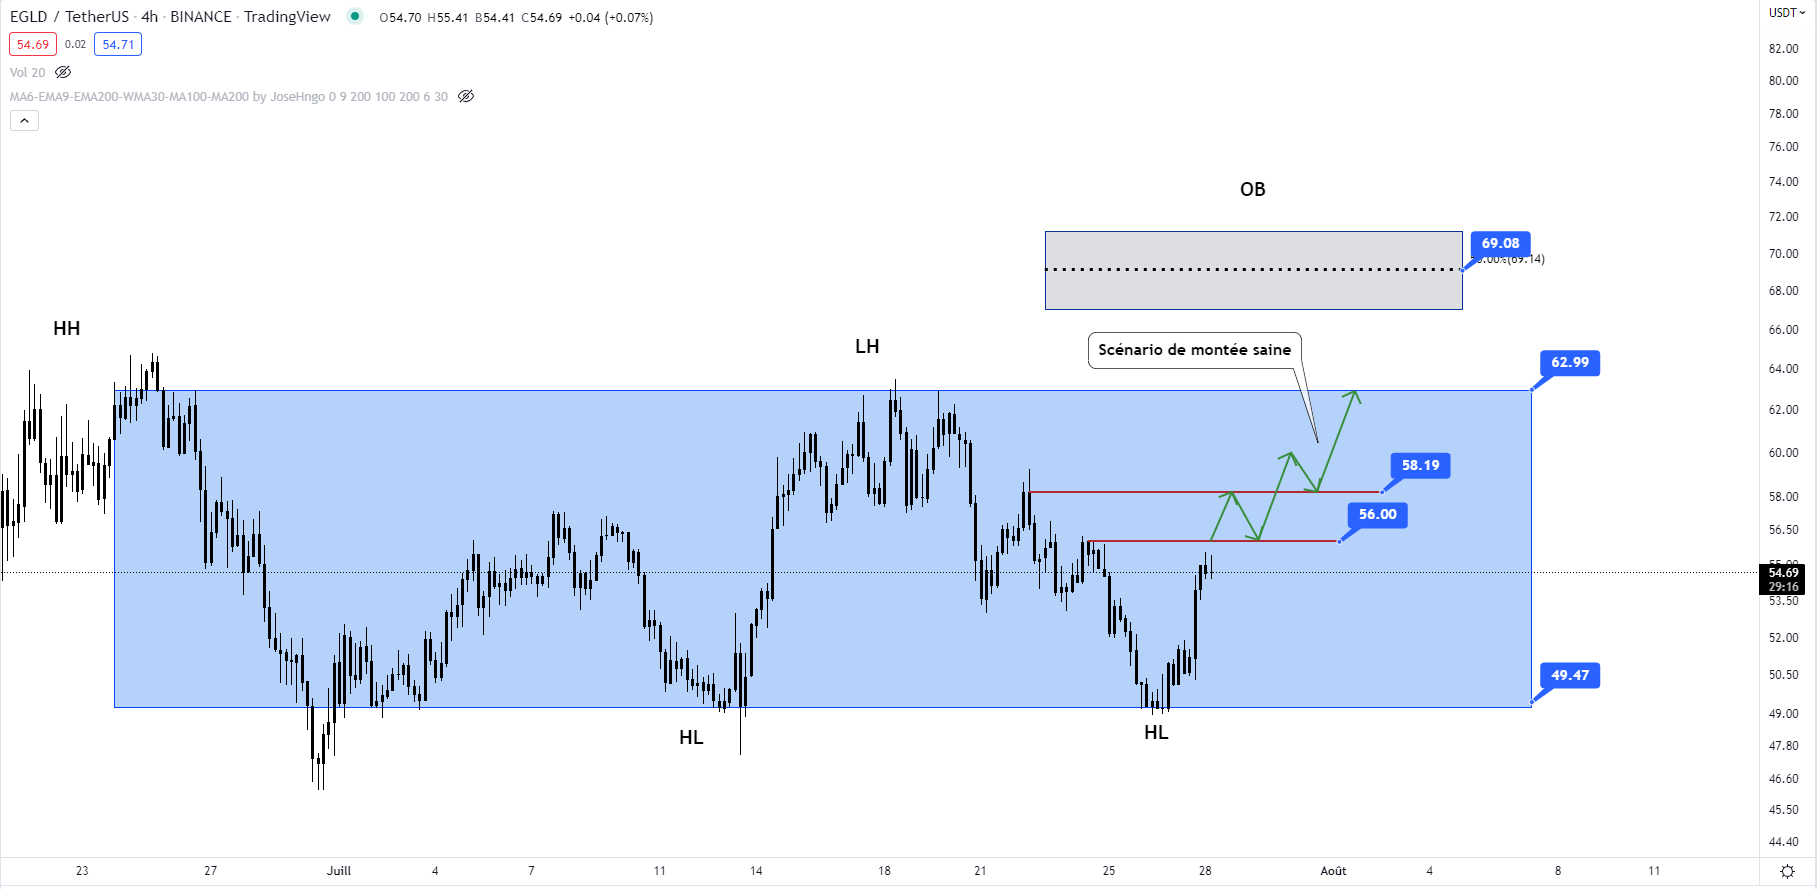 Price of EGLD against the dollar (H4)